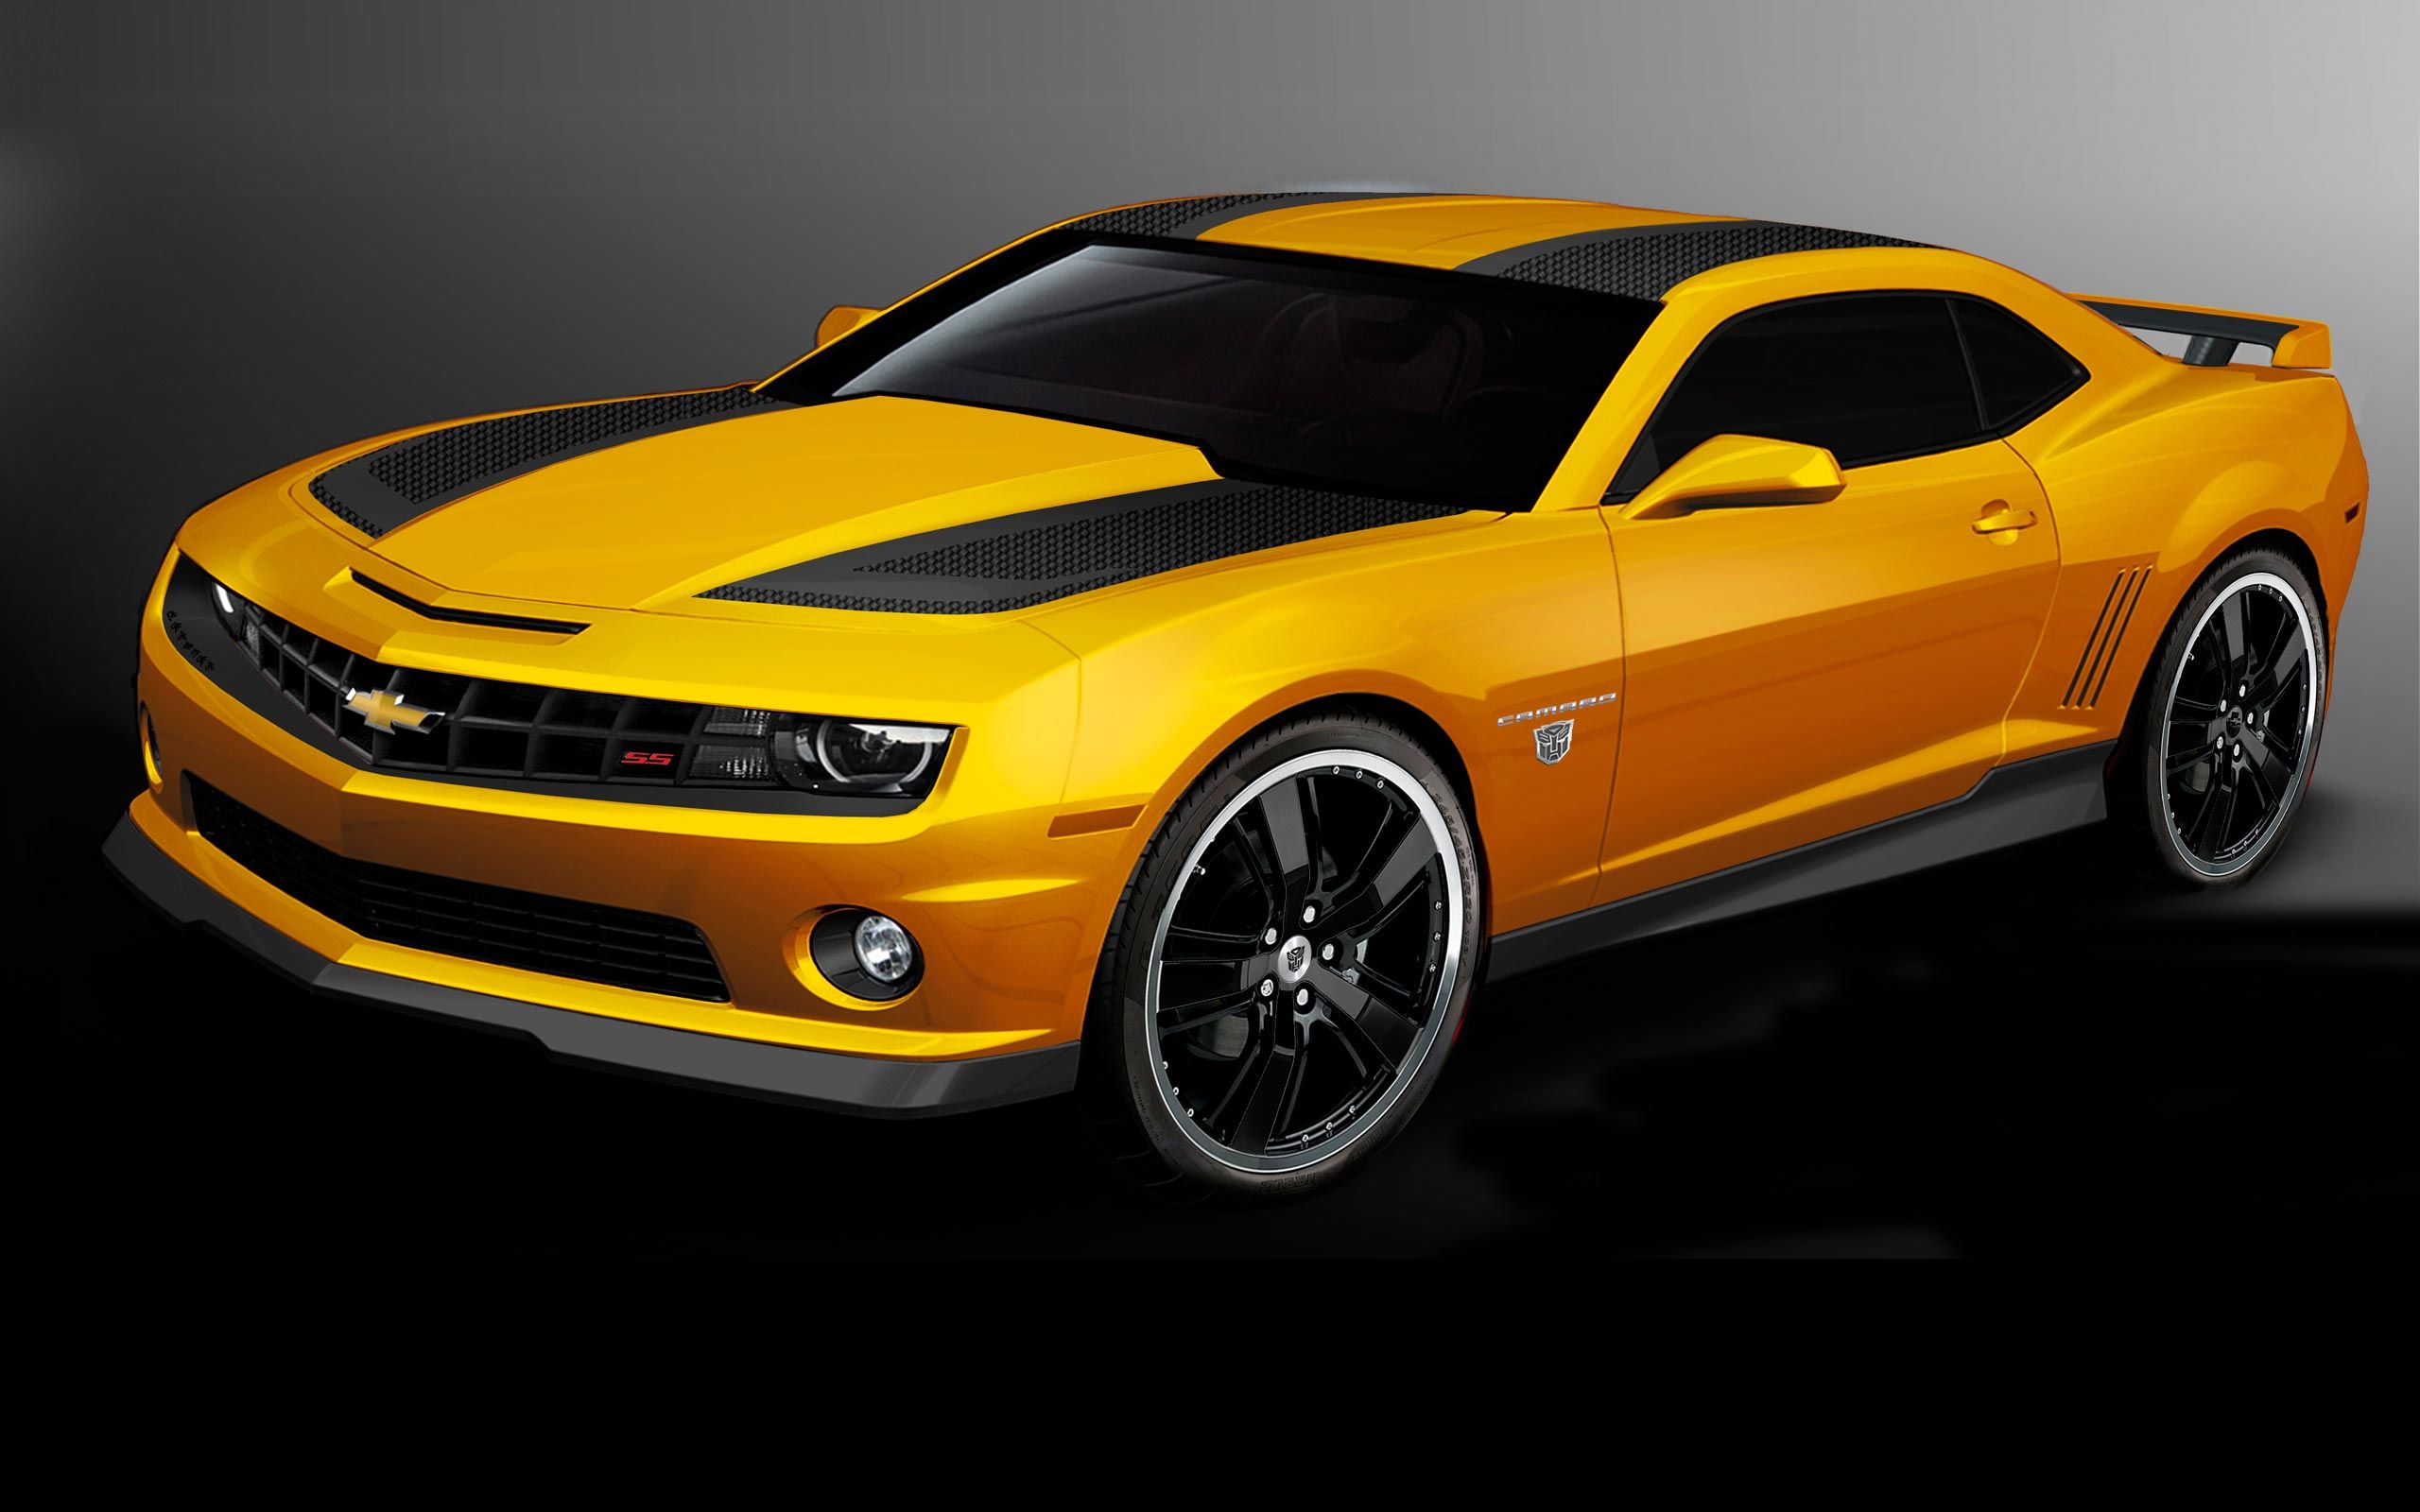 Awesome Car Wallpapers - Chevrolet Camaro Transformers 3 , HD Wallpaper & Backgrounds